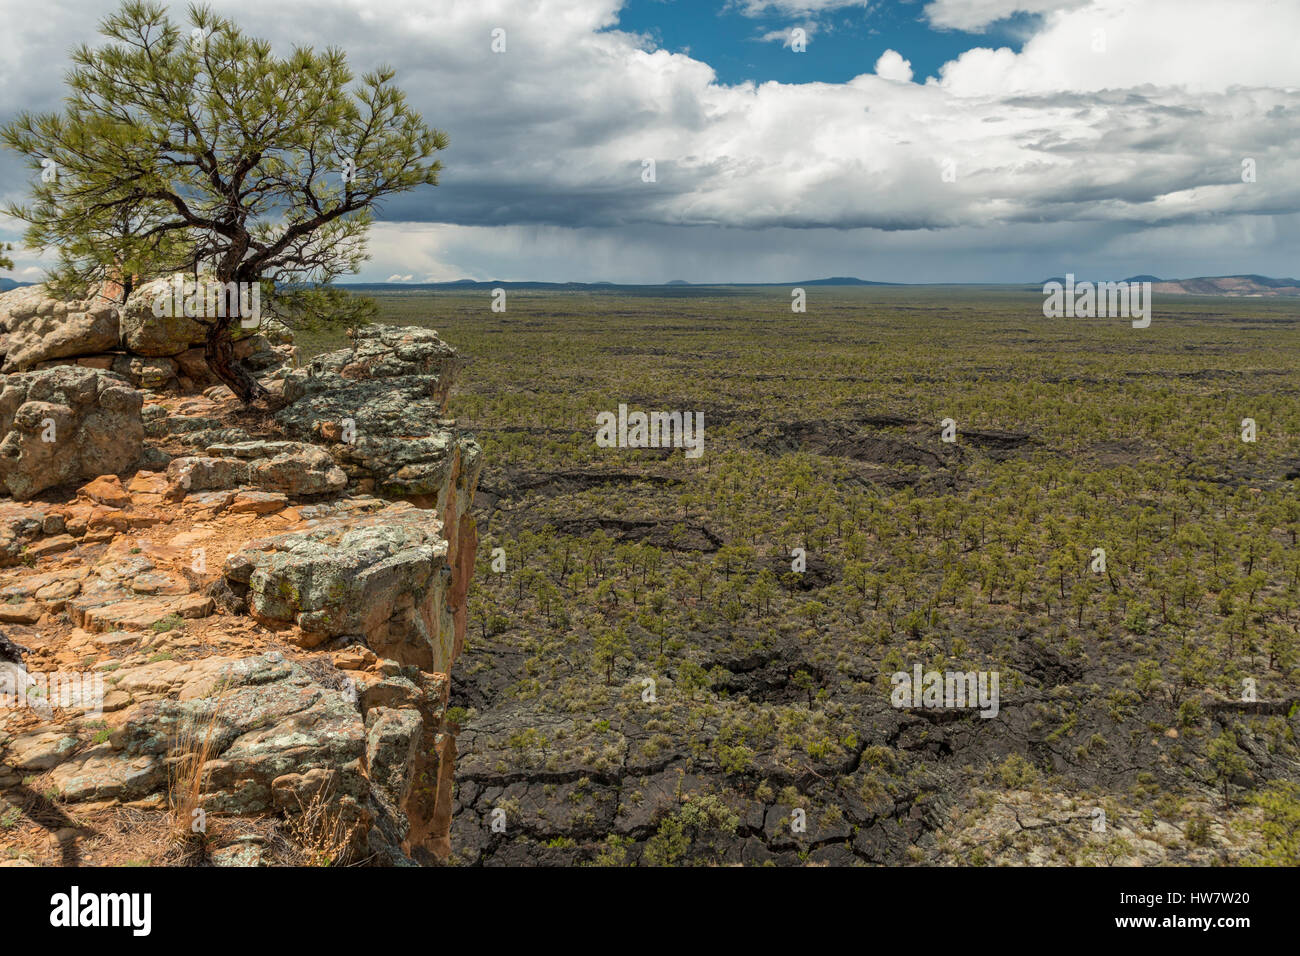 Looking down on the old lavaflows of El Malpais National Monument, New Mexico. Stock Photo